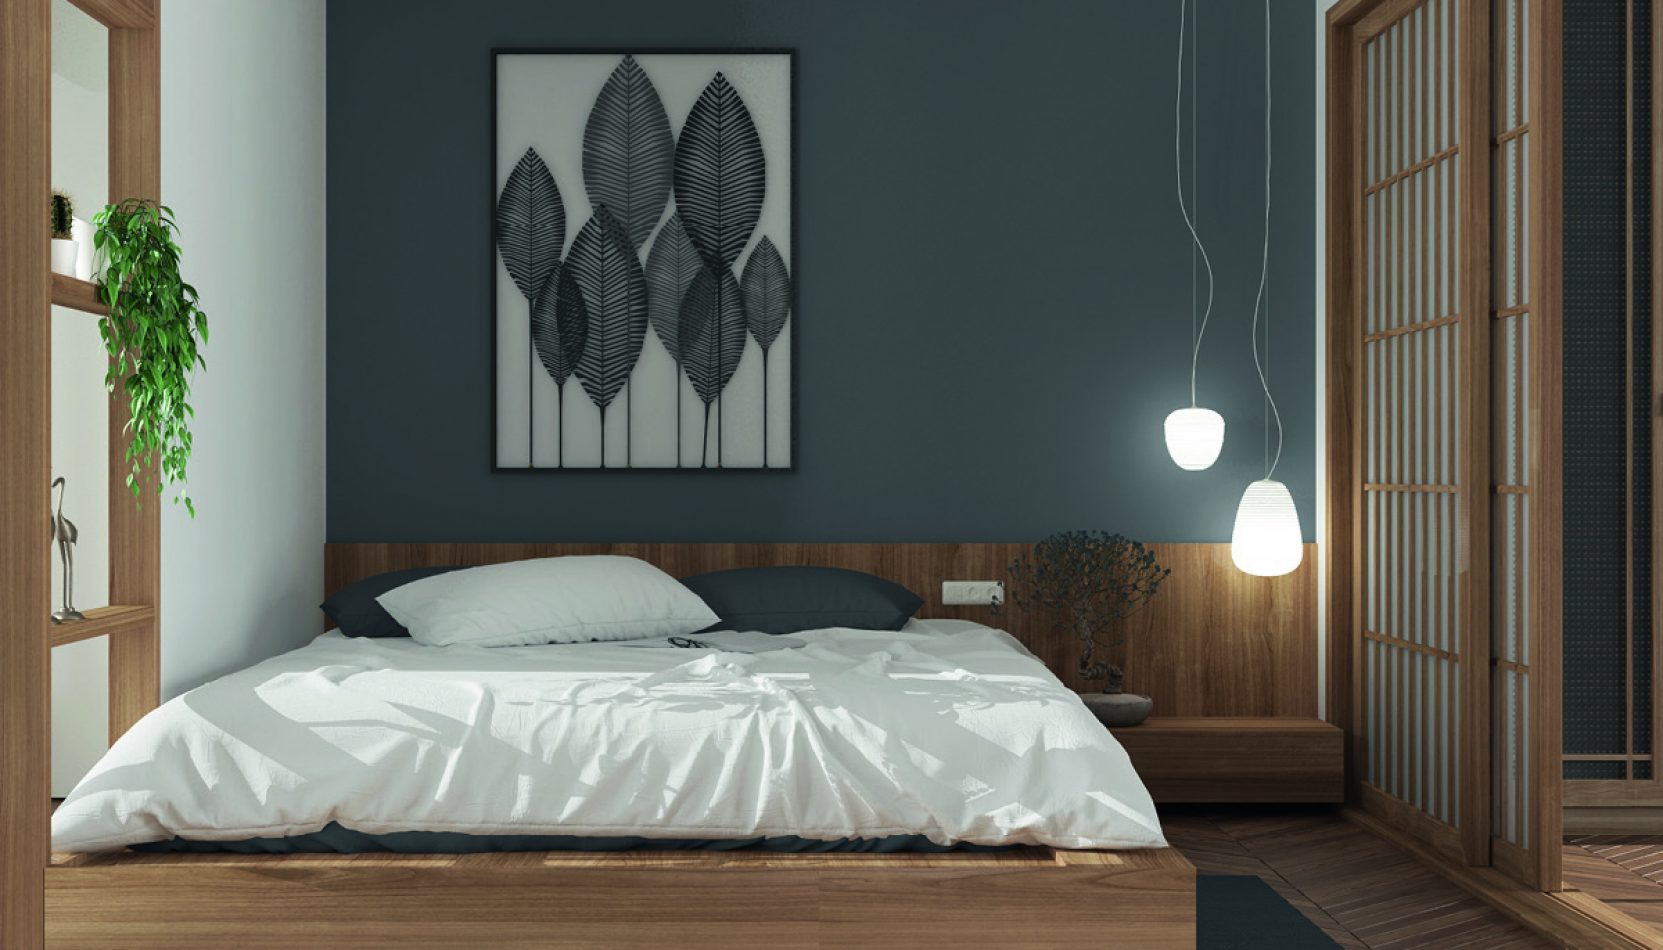 Feng Shui Experts Share Tips to Improve Your Sleep